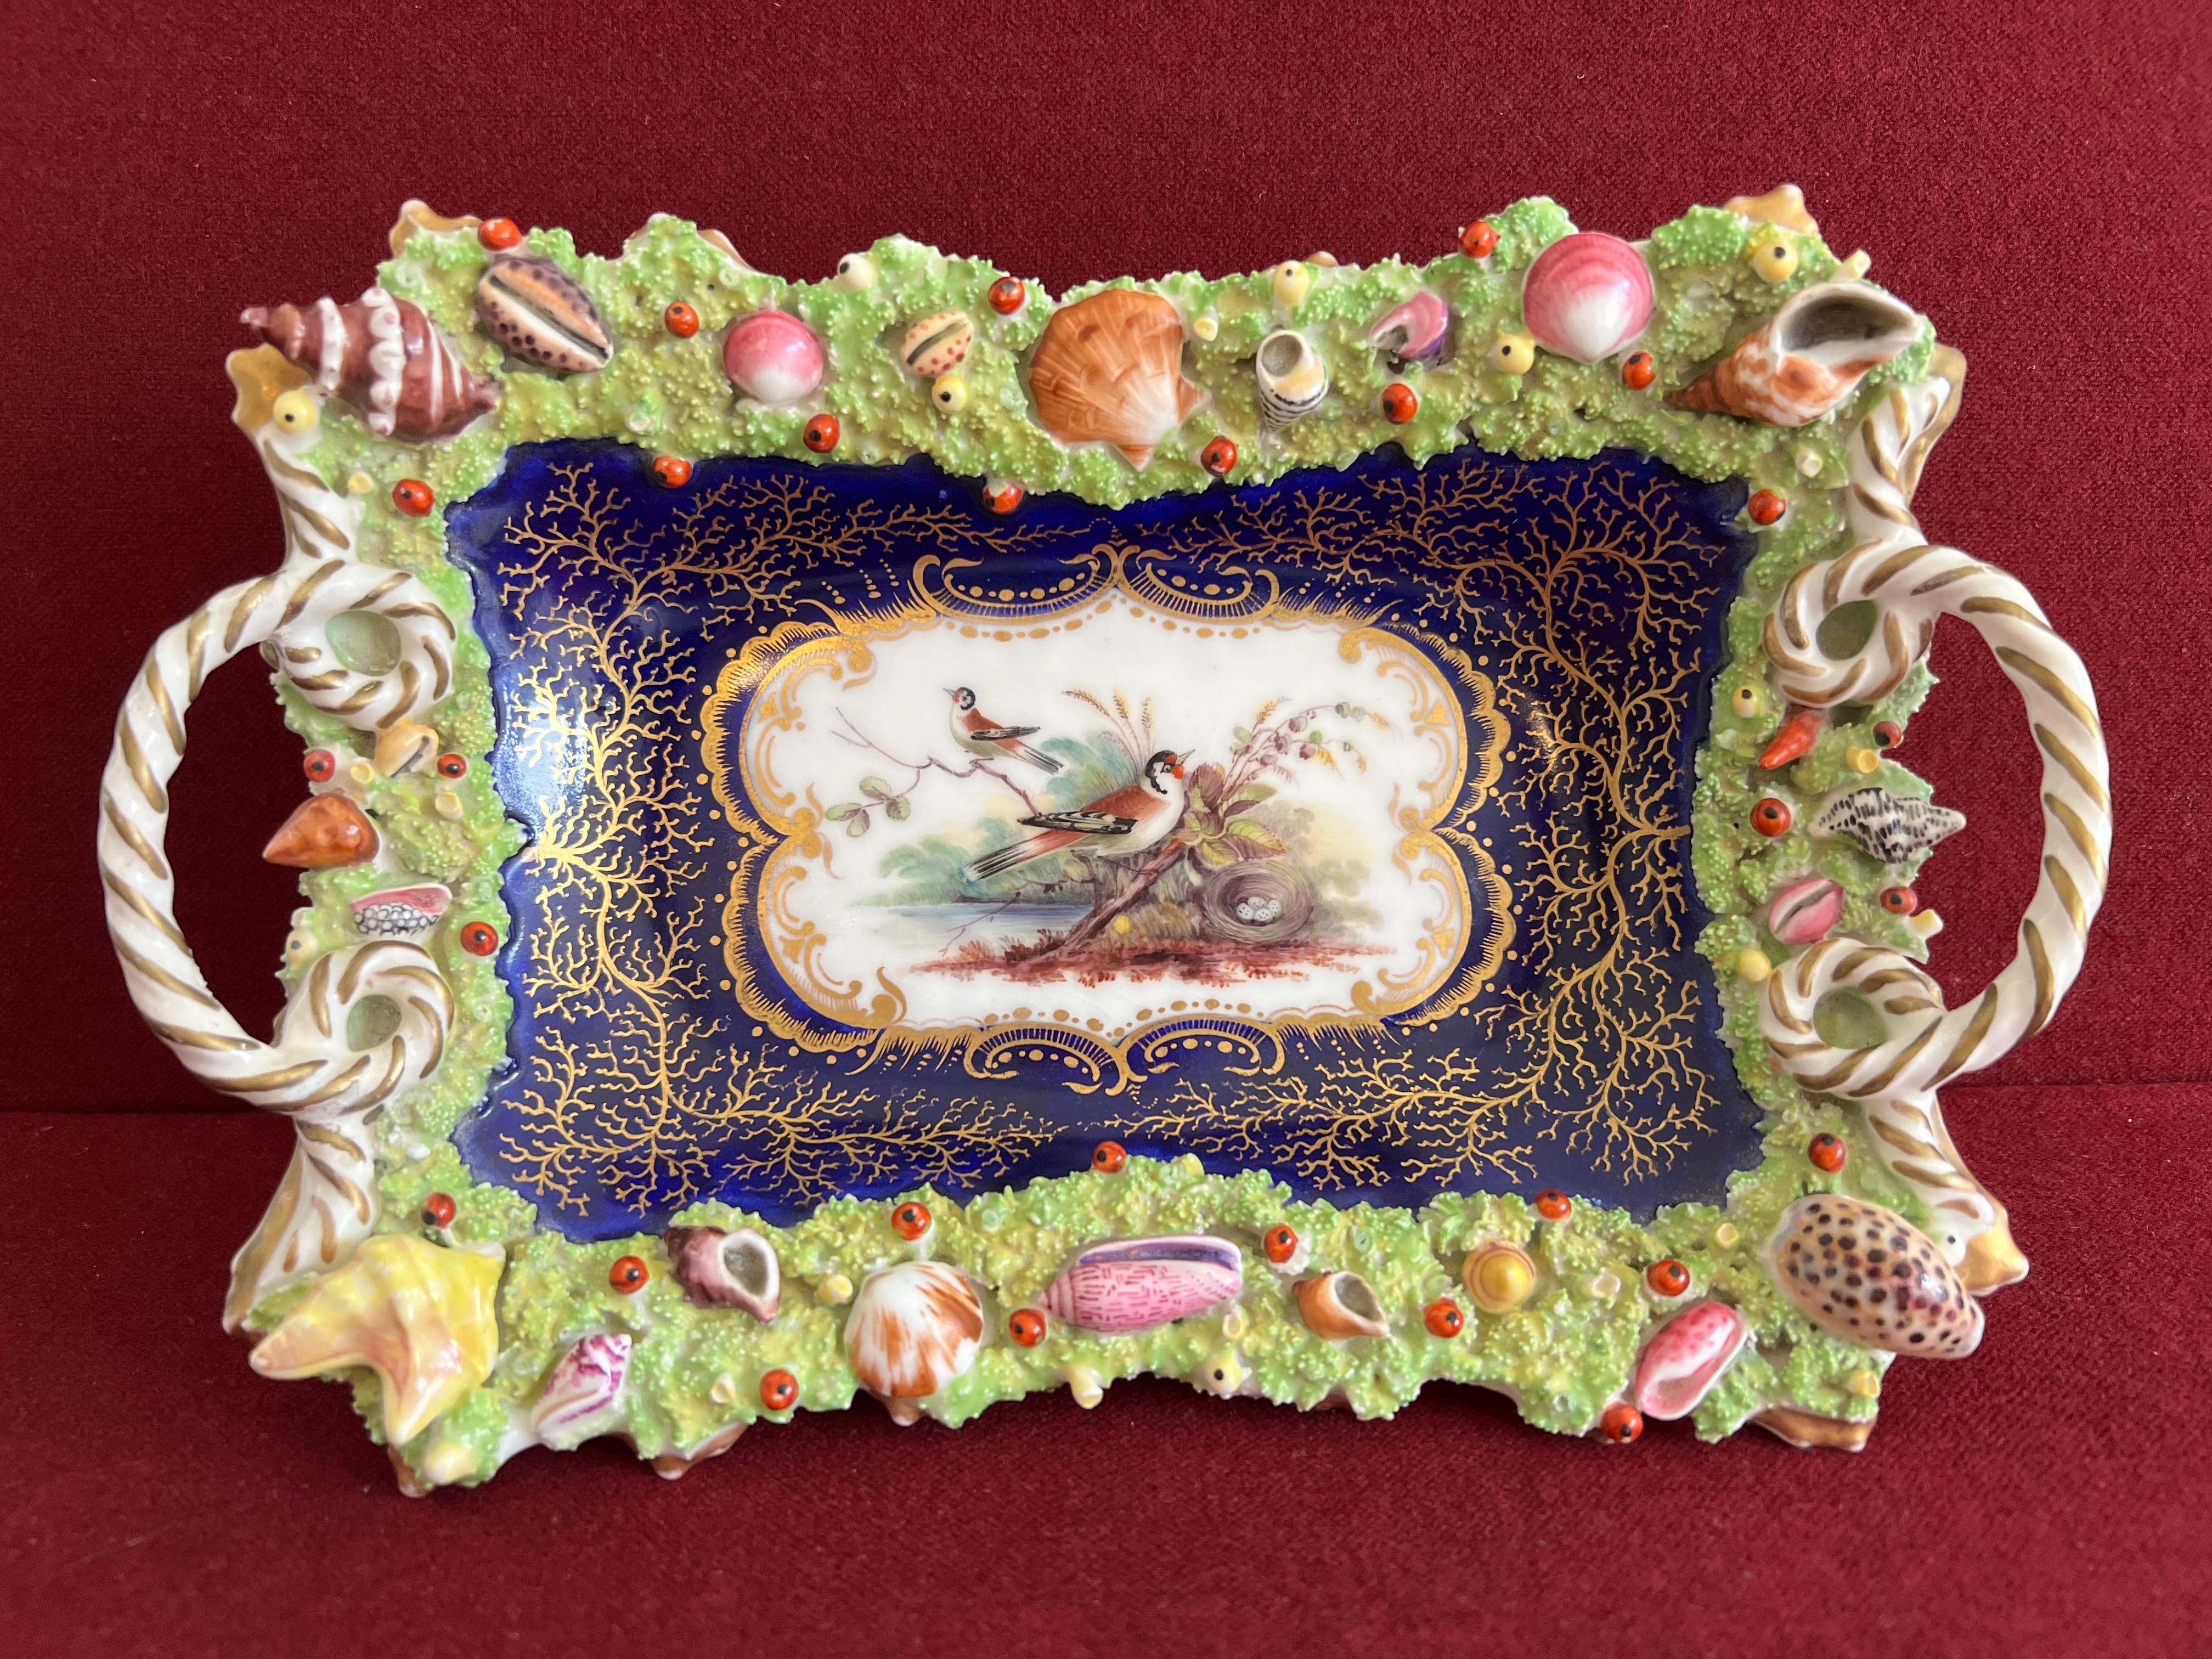 A superbly made and decorated Chamberlain Worcester porcelain basket c.1840. Encrusted with beautifully modelled seashells seaweed and coral. The centre of the tray superbly painted with Chaffinch and nest in a landscape. The inner border decorated